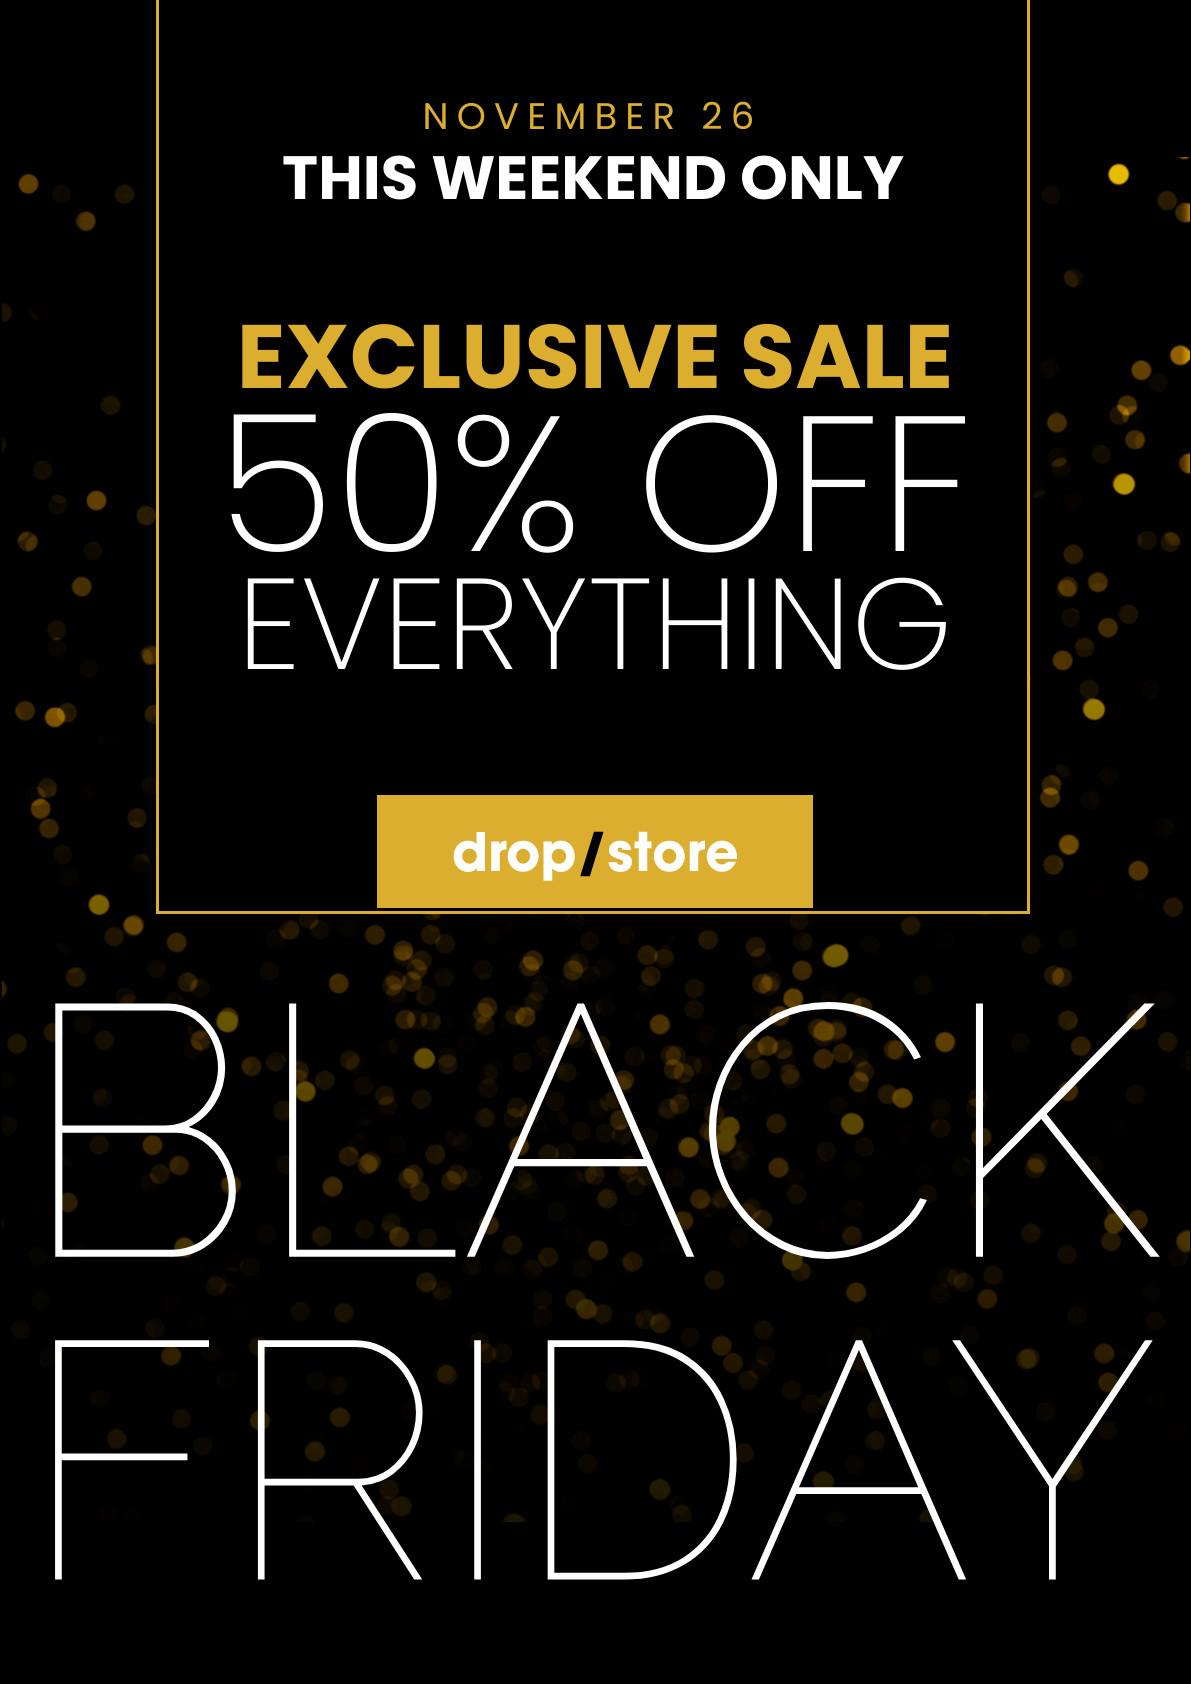 Black Friday Exclusive Gold Glitter Sales Poster 1191x1684